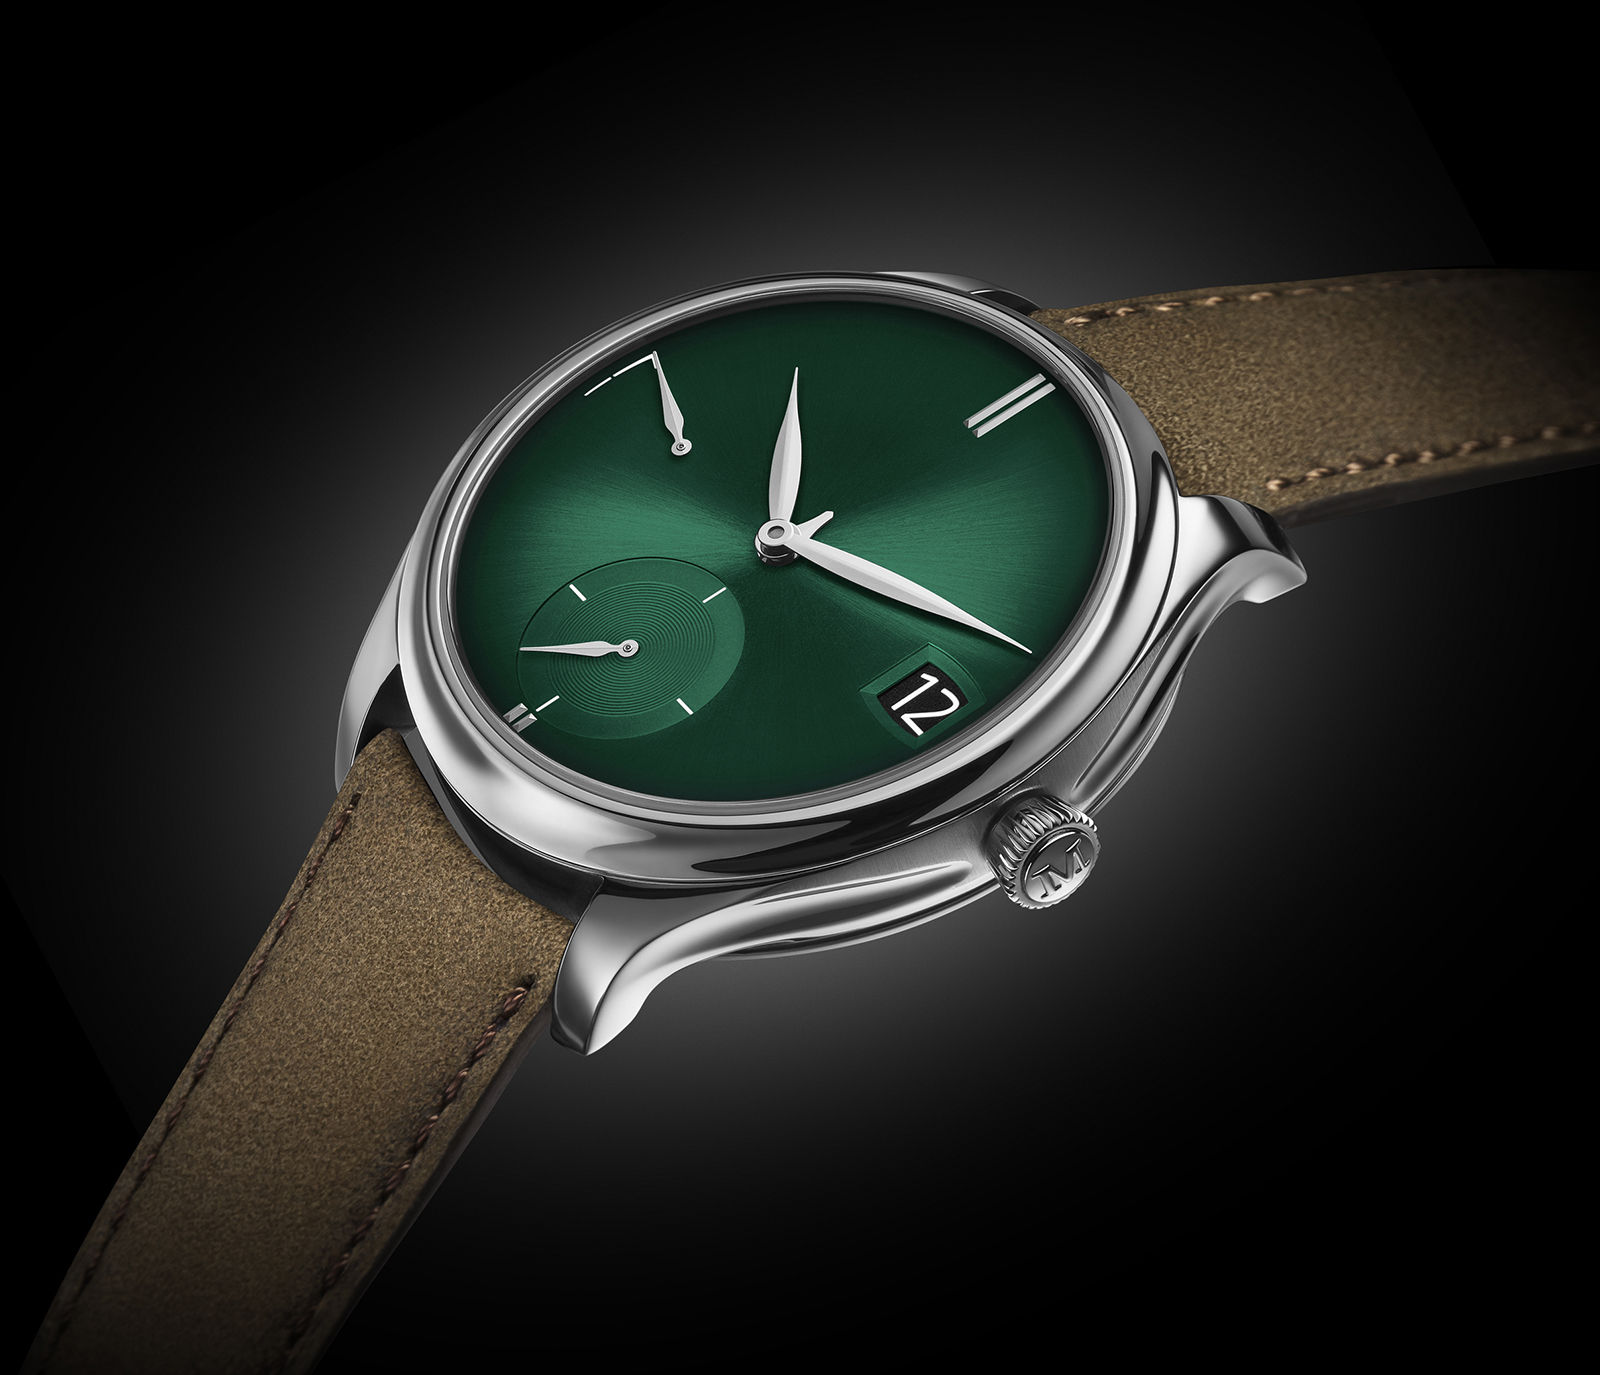 H. Moser & Cie. Endeavour Perpetual Calendar Purity in Cosmic Green